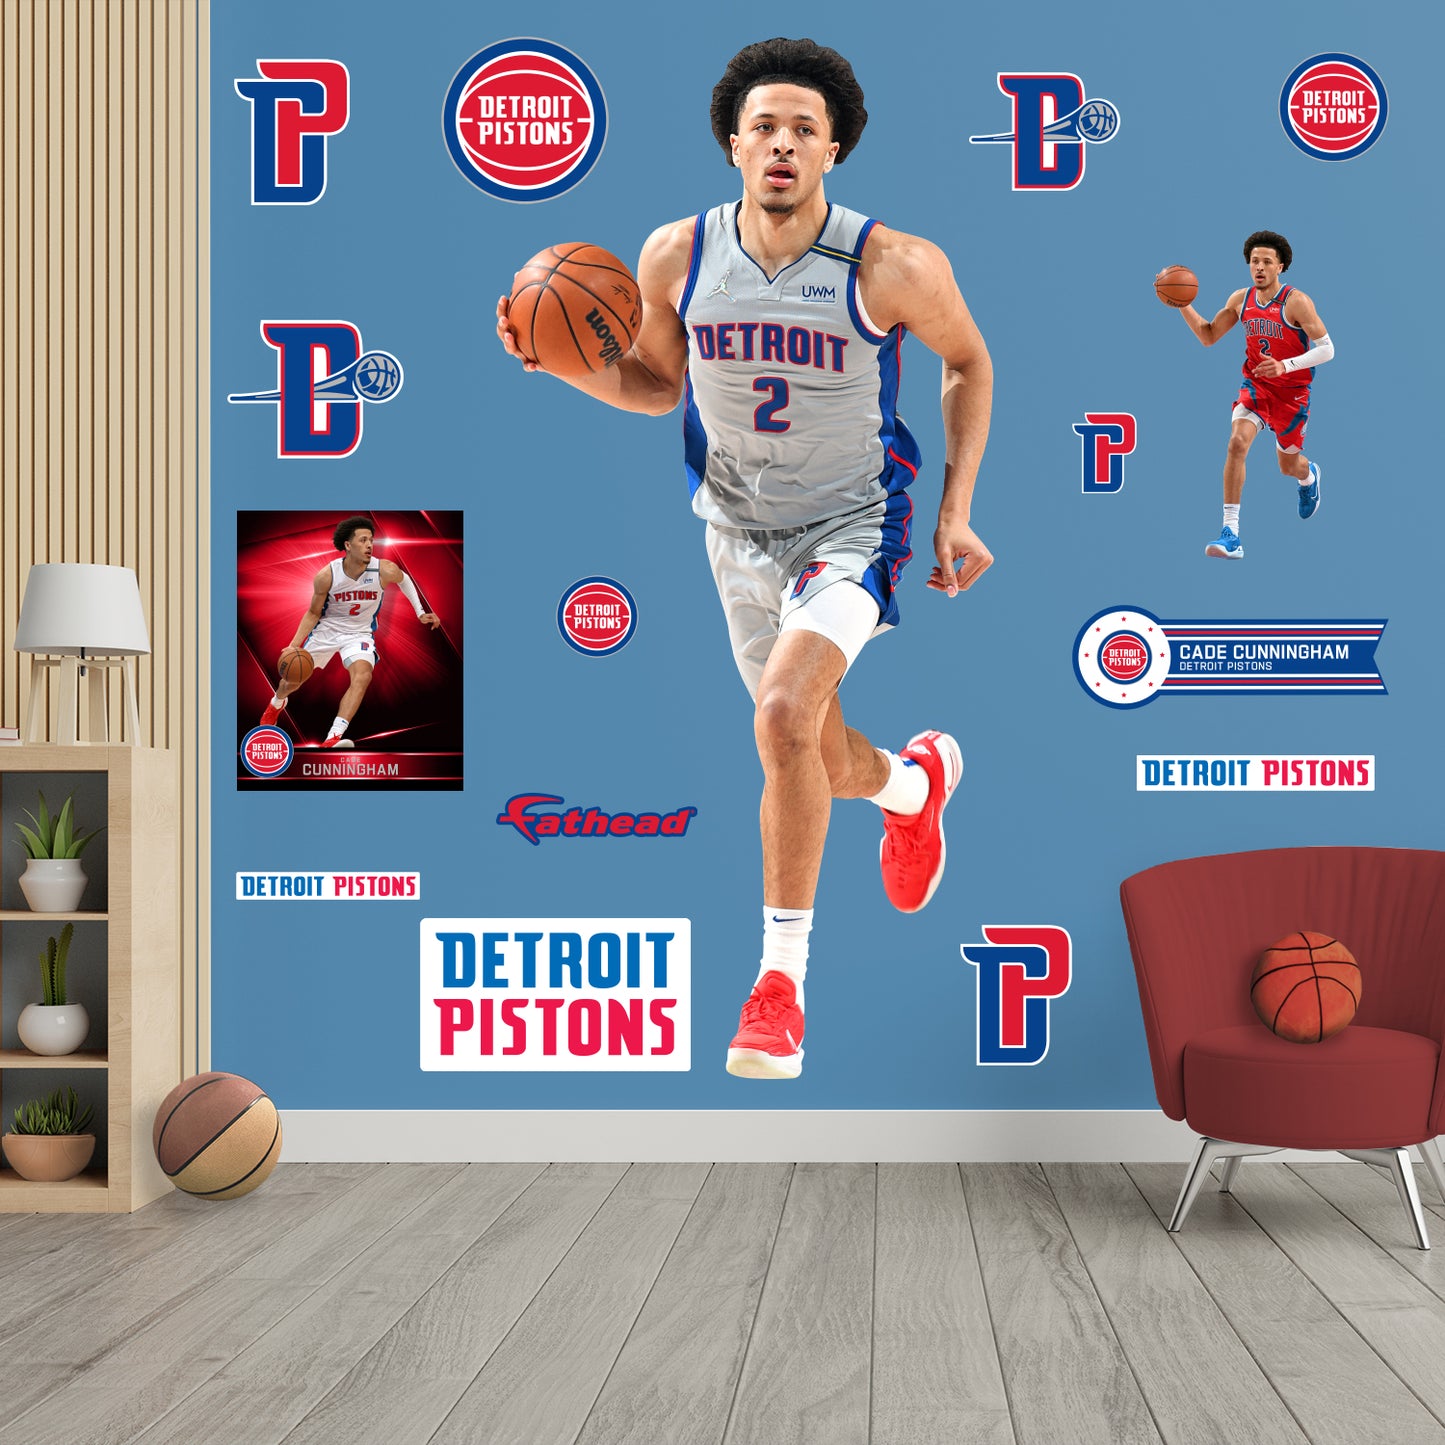 Detroit Pistons: Cade Cunningham 2022 - NBA Removable Adhesive Wall Decal Life-Size Athlete +16 Wall Decals 37W x 77H